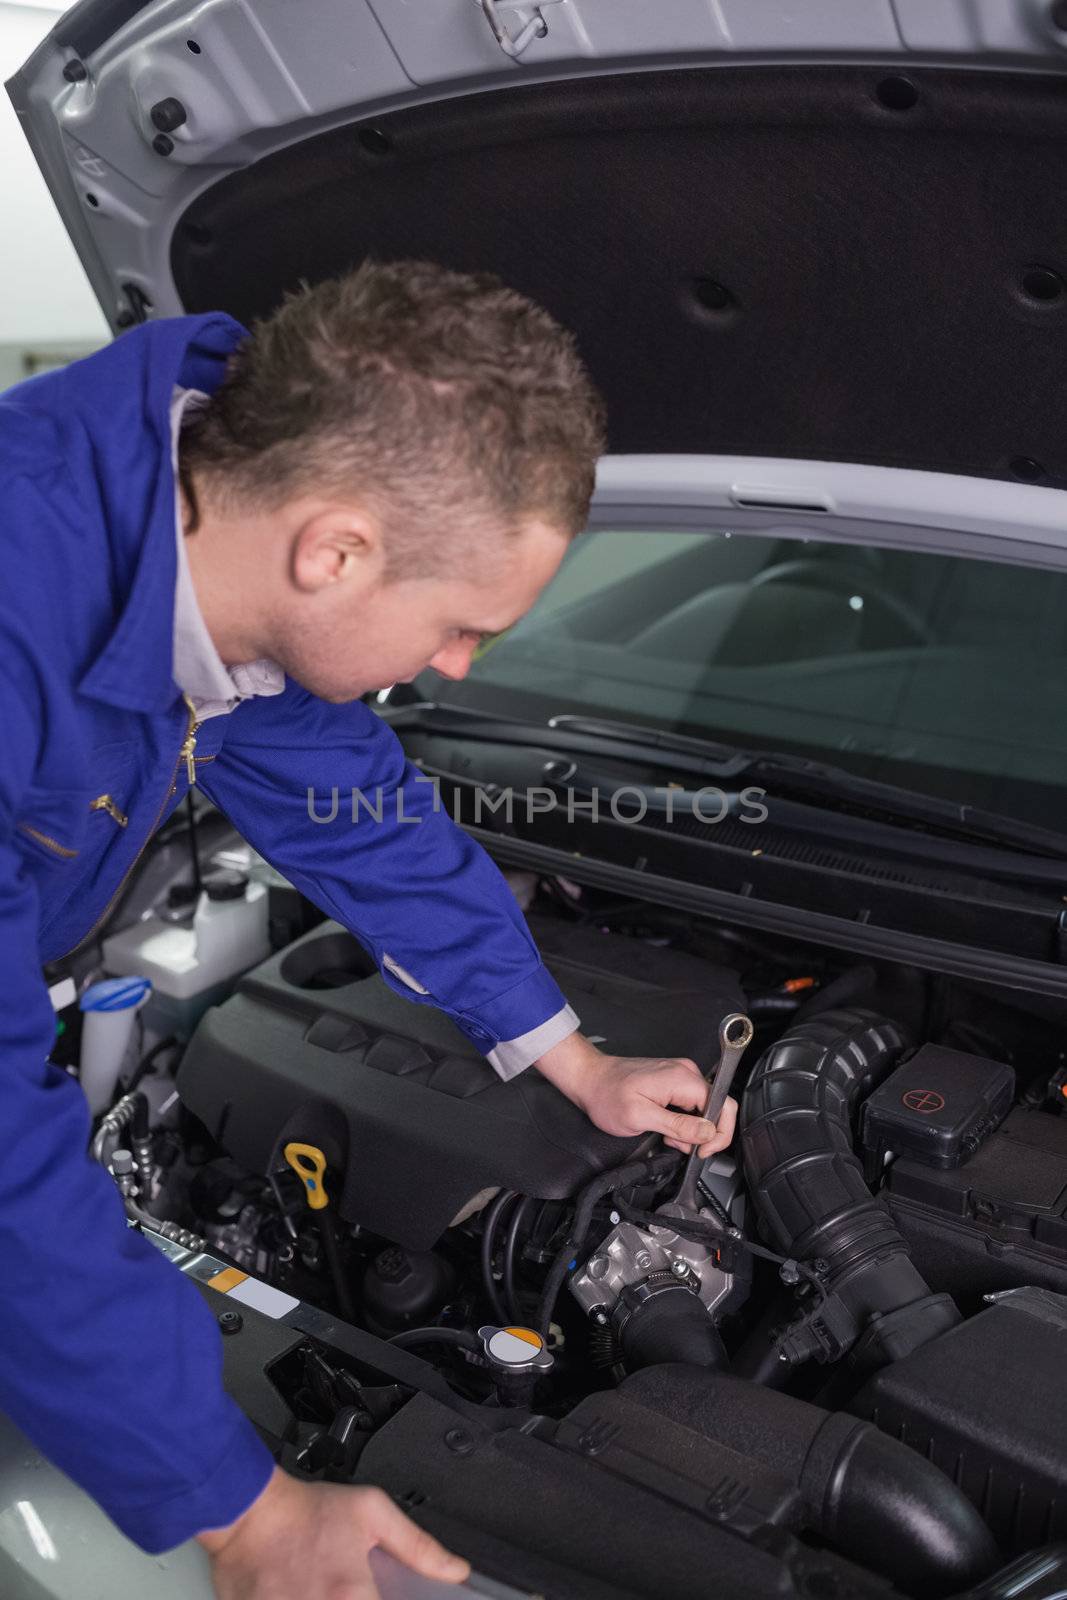 Mechanic repairing an engine with a spanner in a garage